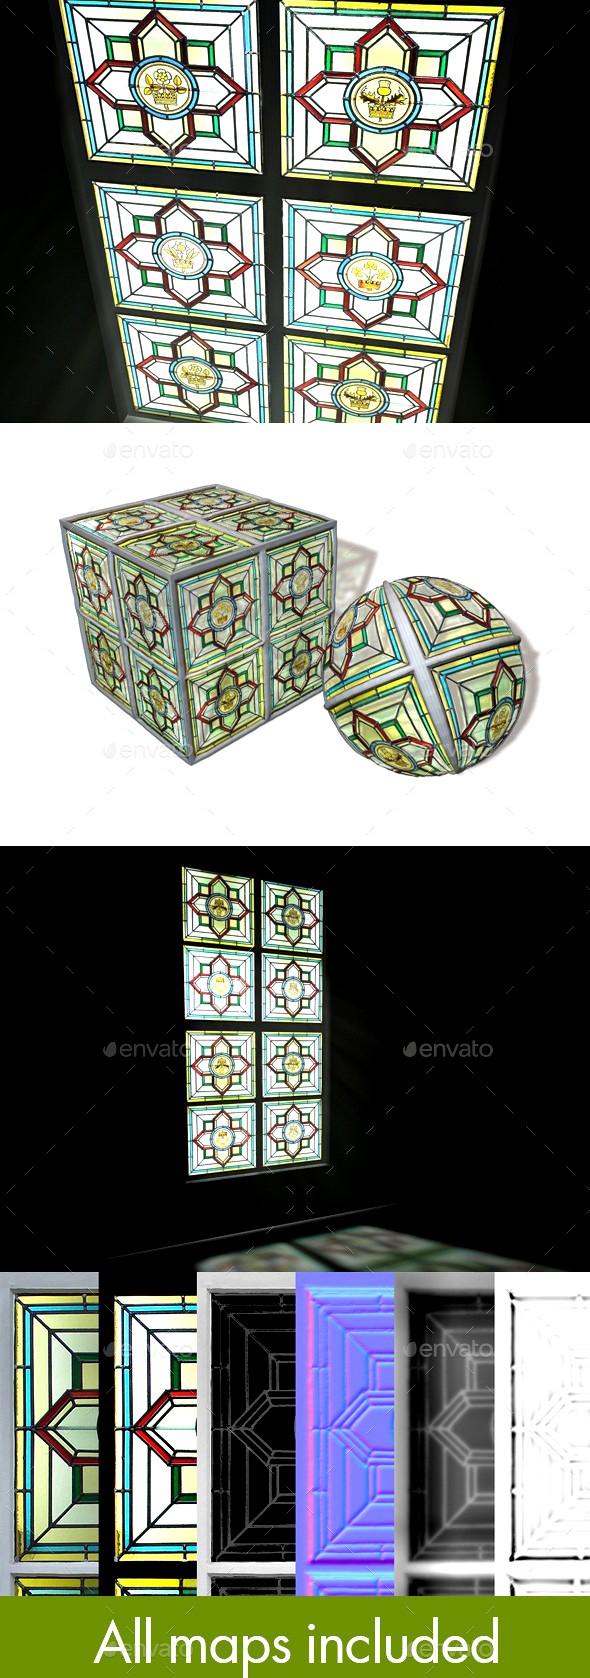 British Stained Glass Window Seamless Texture